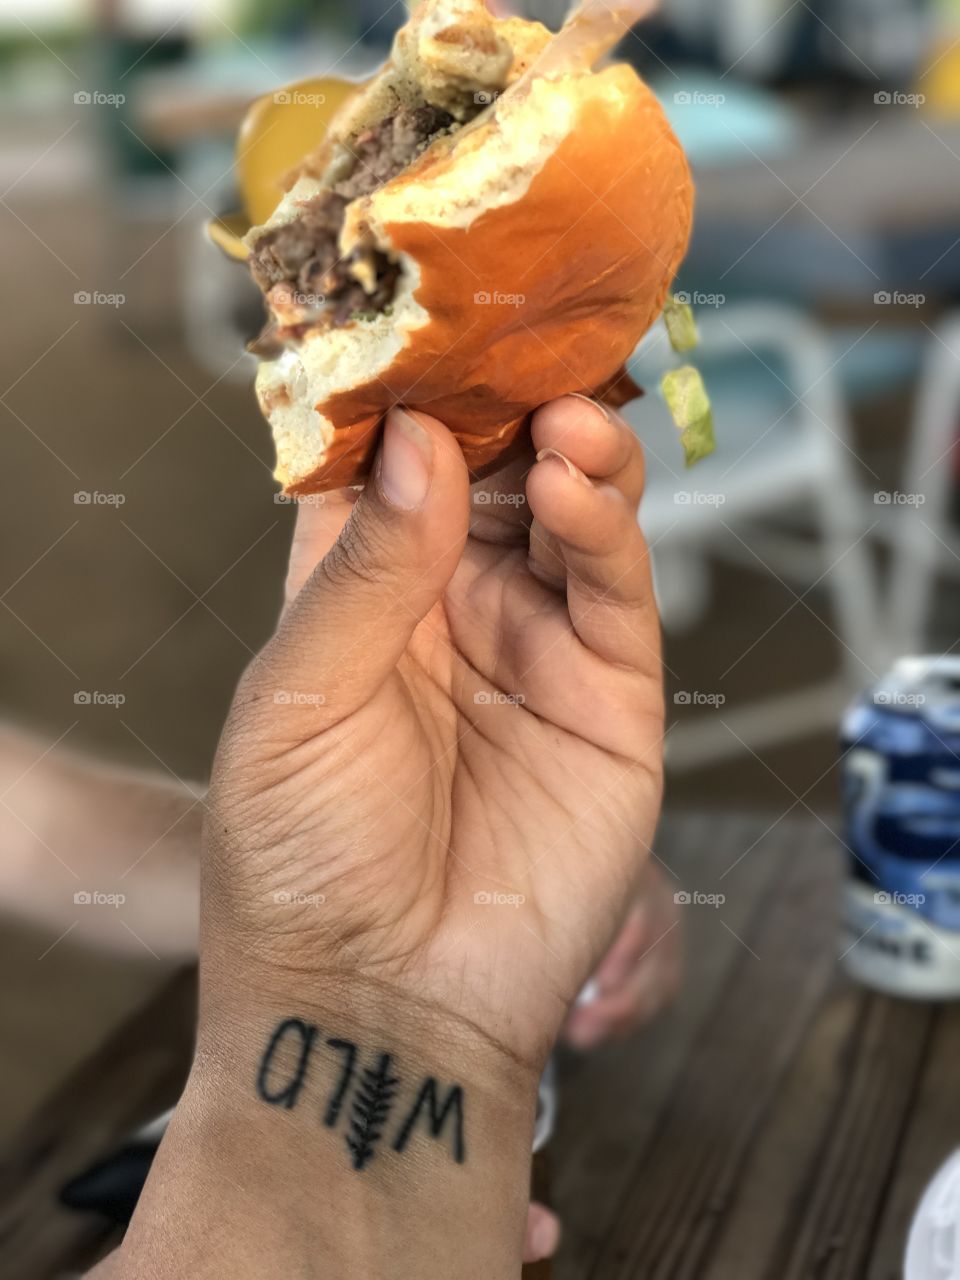 Burgers and tattoos 